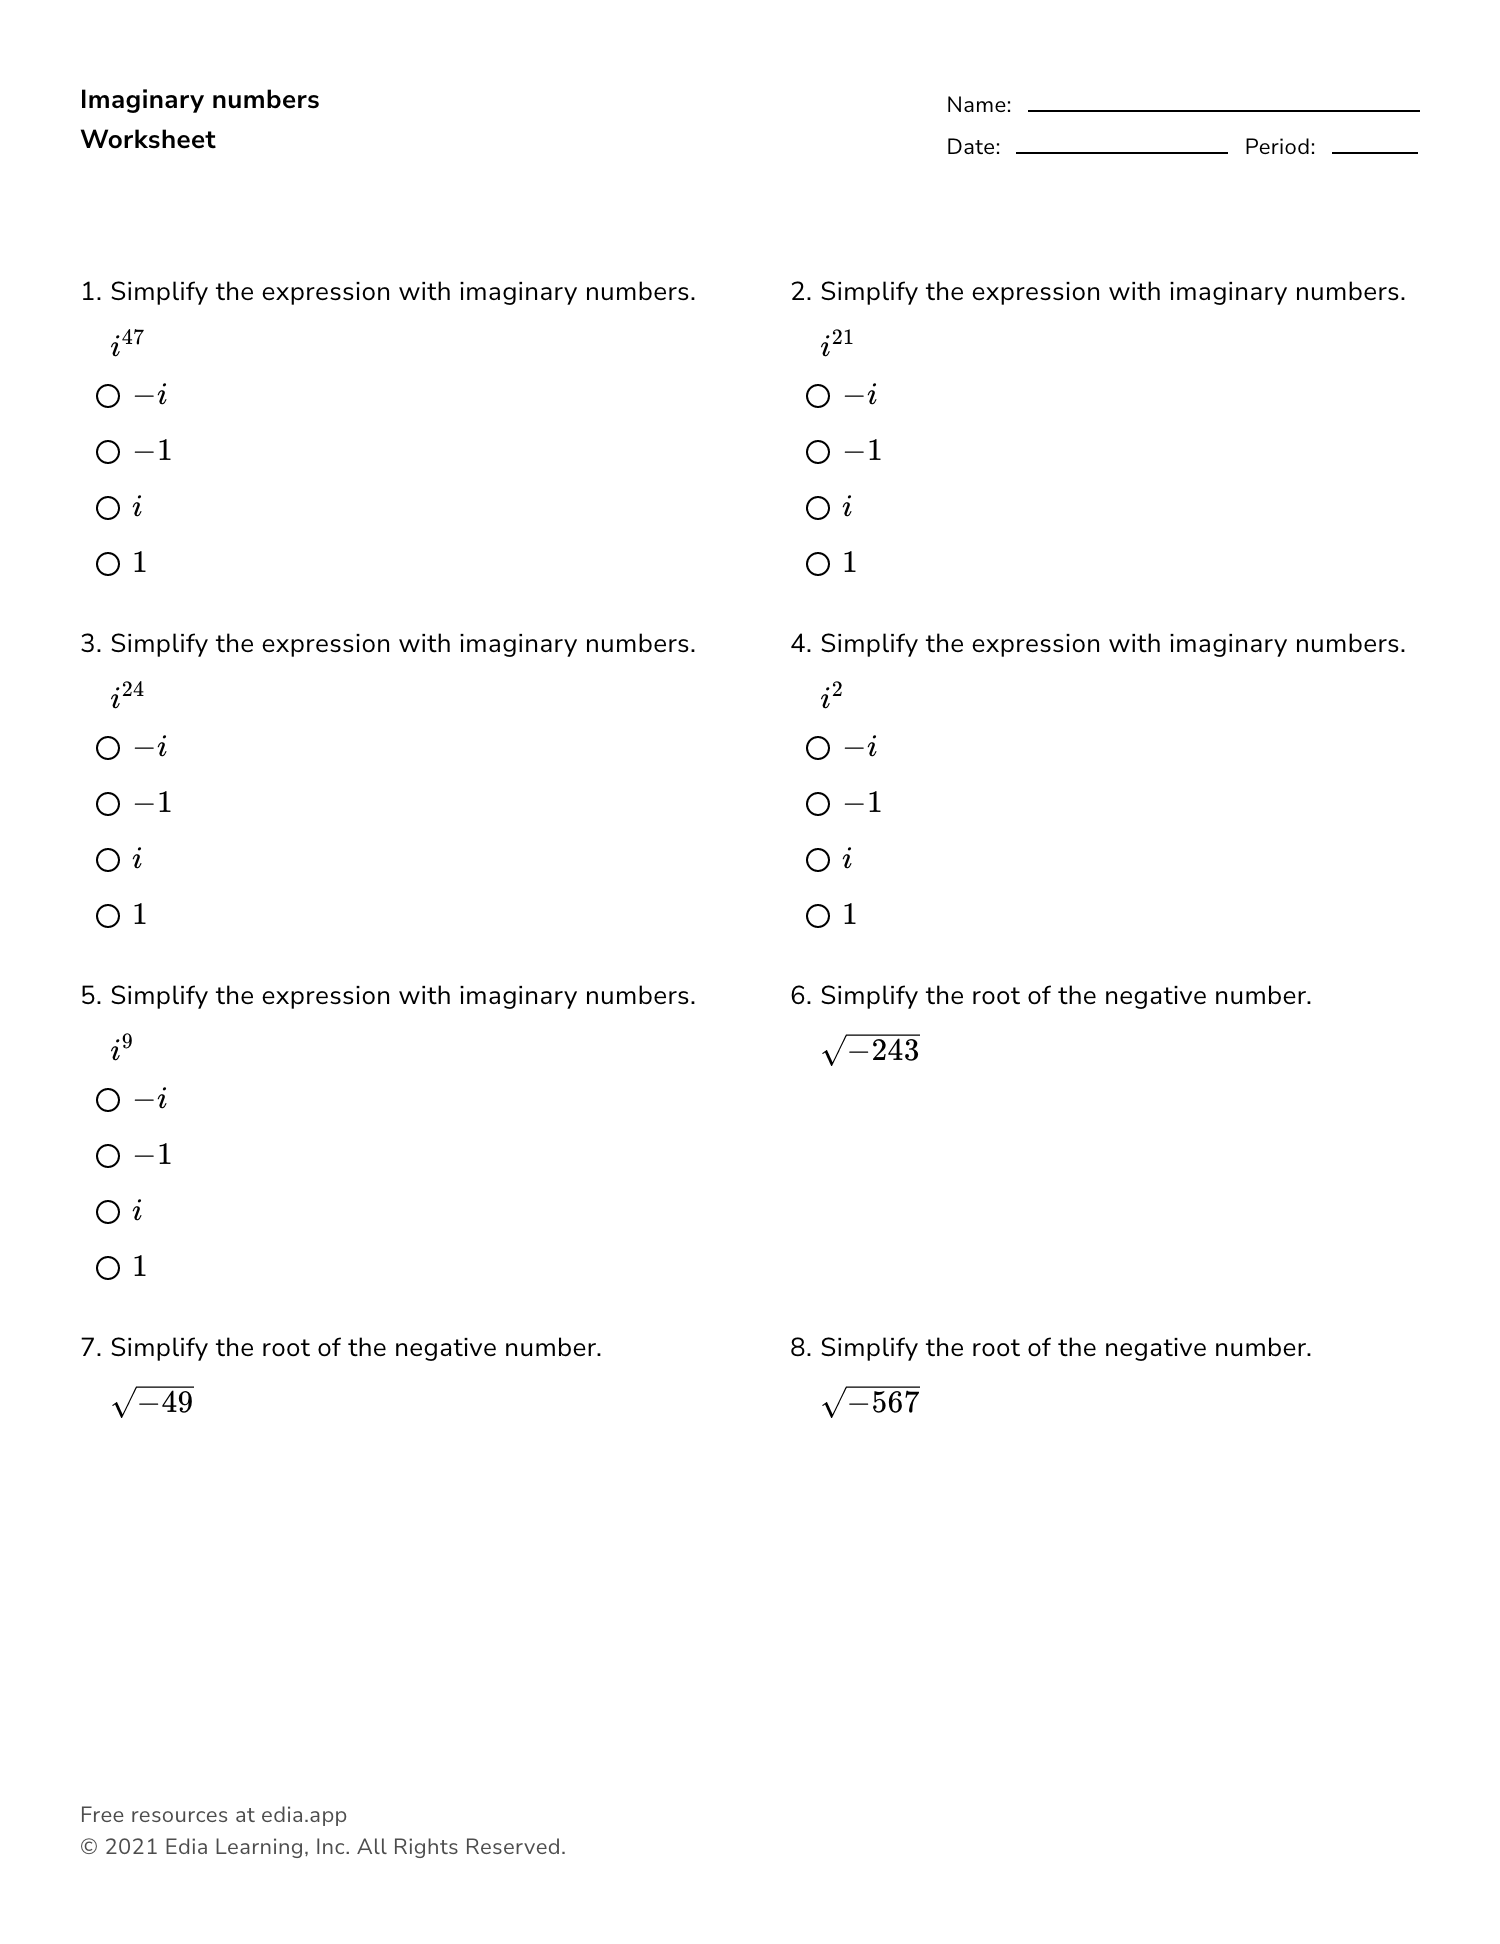 imaginary-numbers-worksheet-pdf-and-answer-key-29-scaffolded-questions-on-simplifying